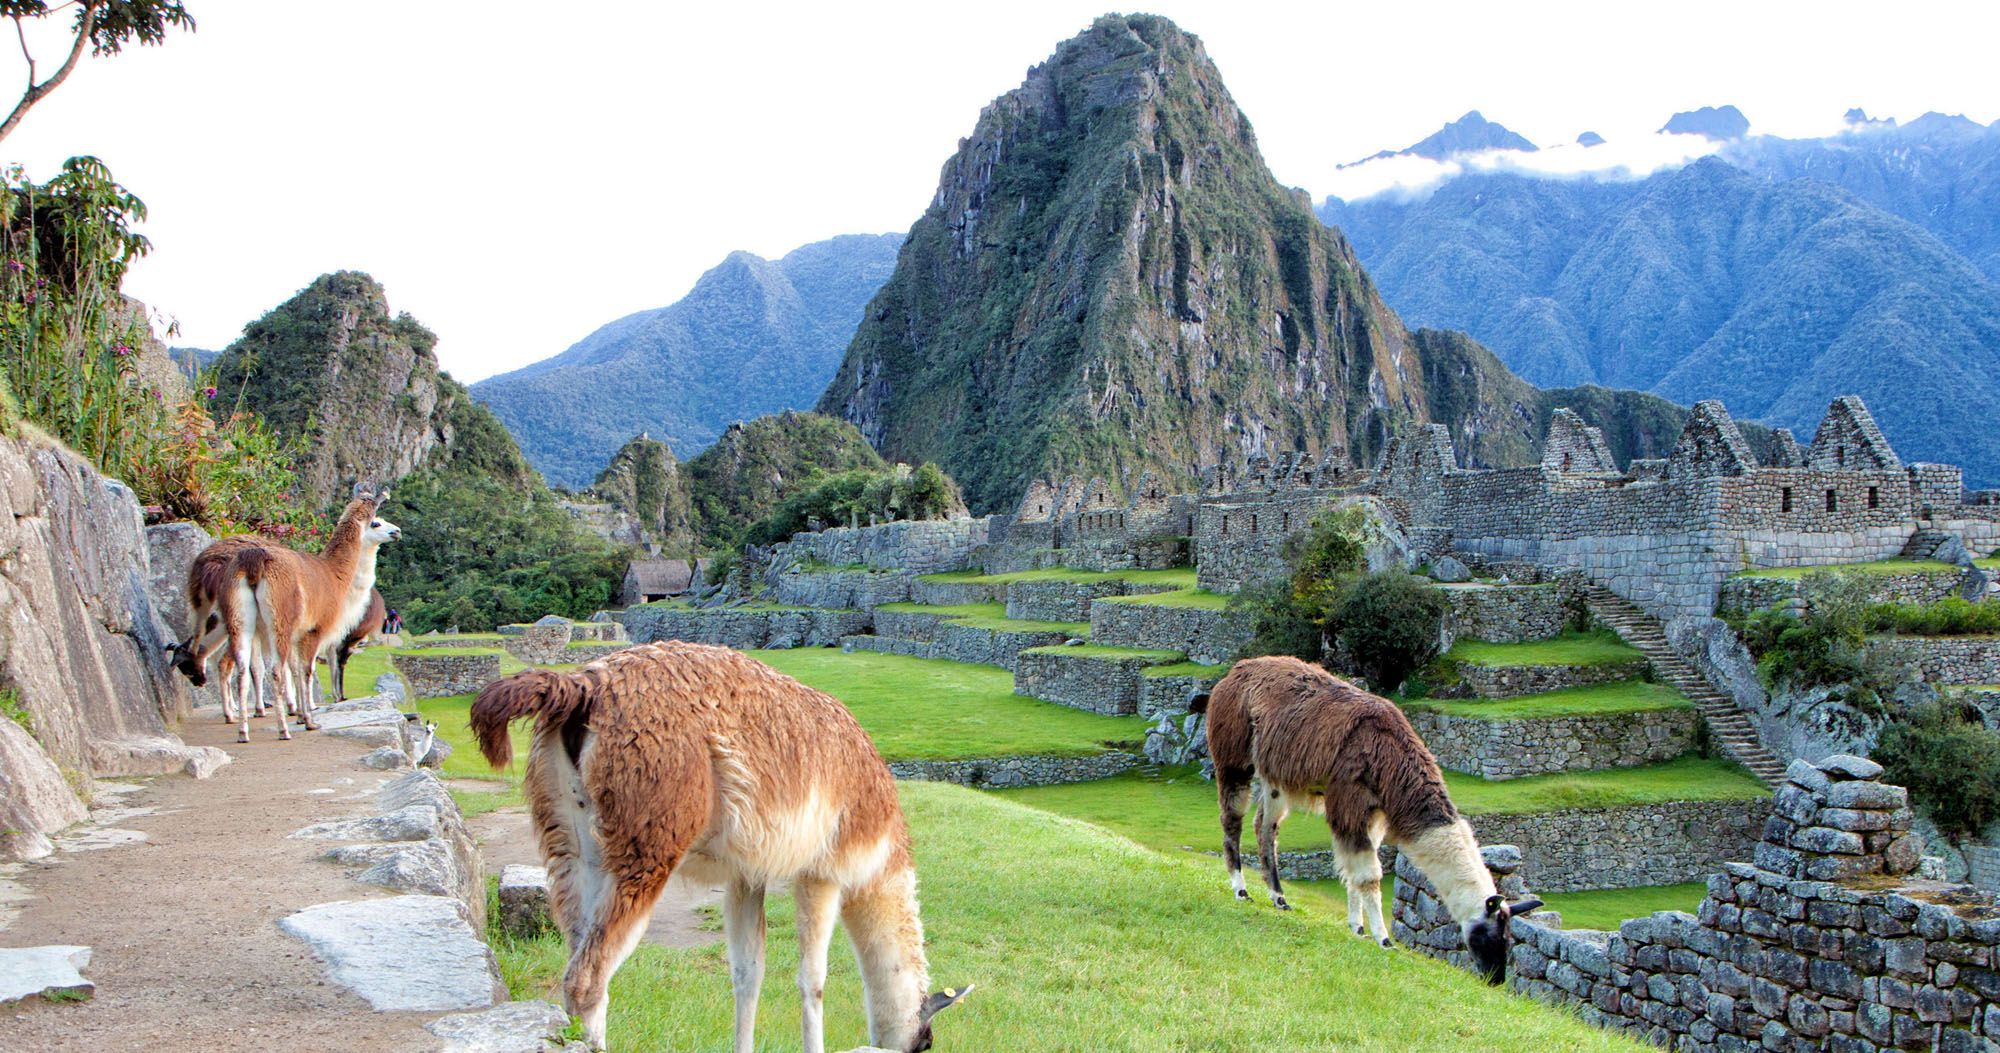 Featured image for “10 Day Peru Itinerary: Machu Picchu, Sacred Valley, & the Amazon”